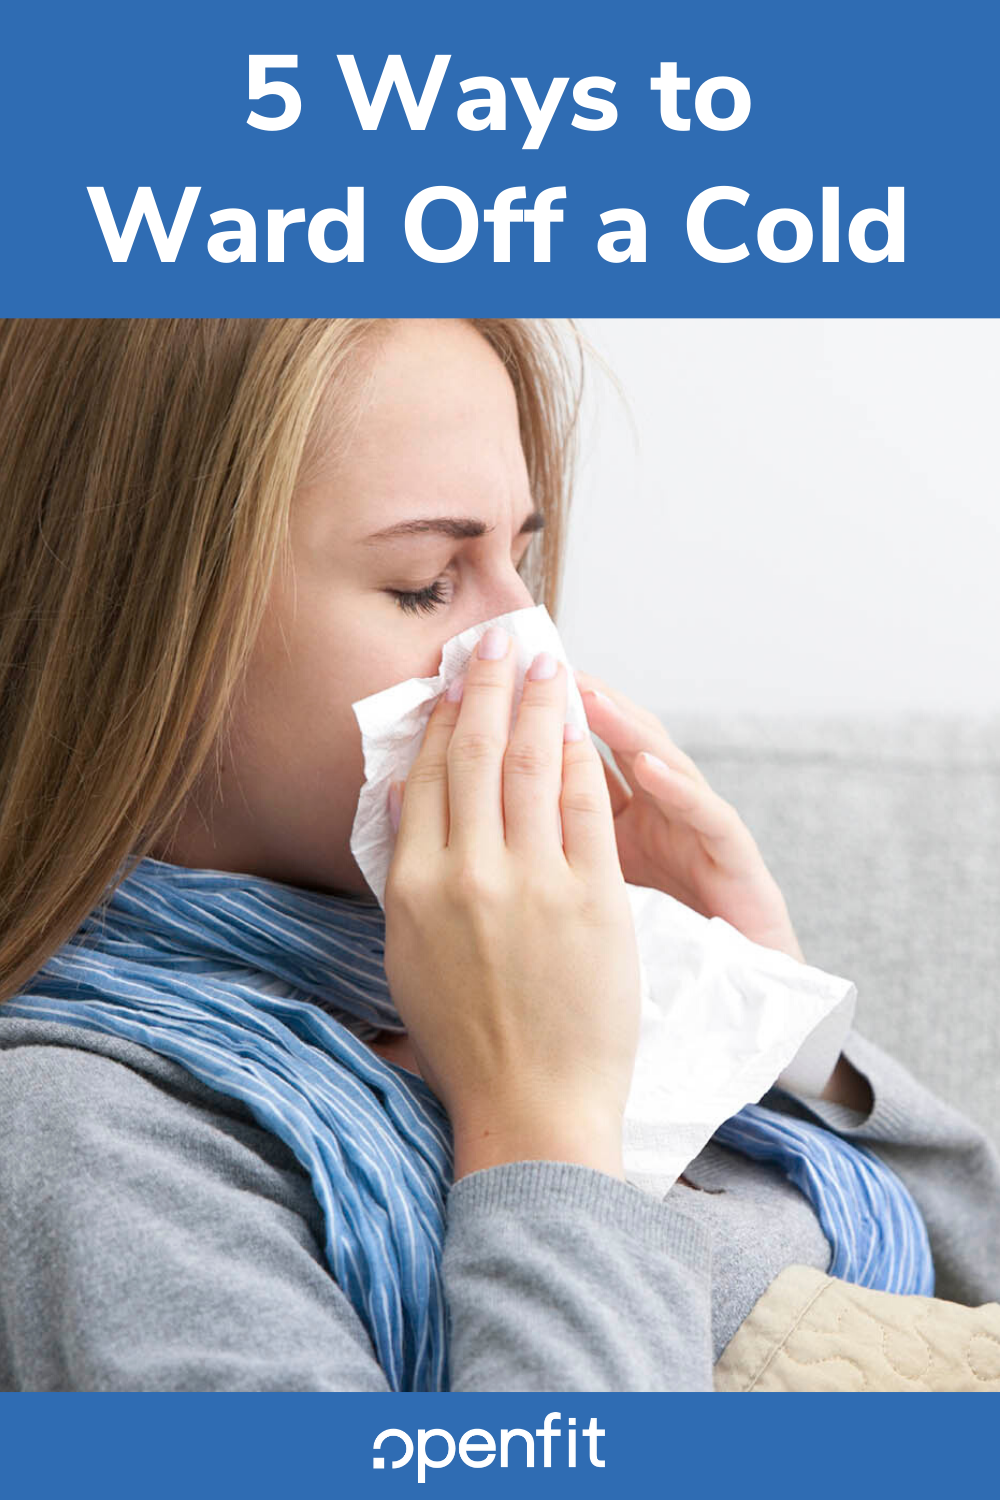 5 Ways to Ward Off a Cold in 2020